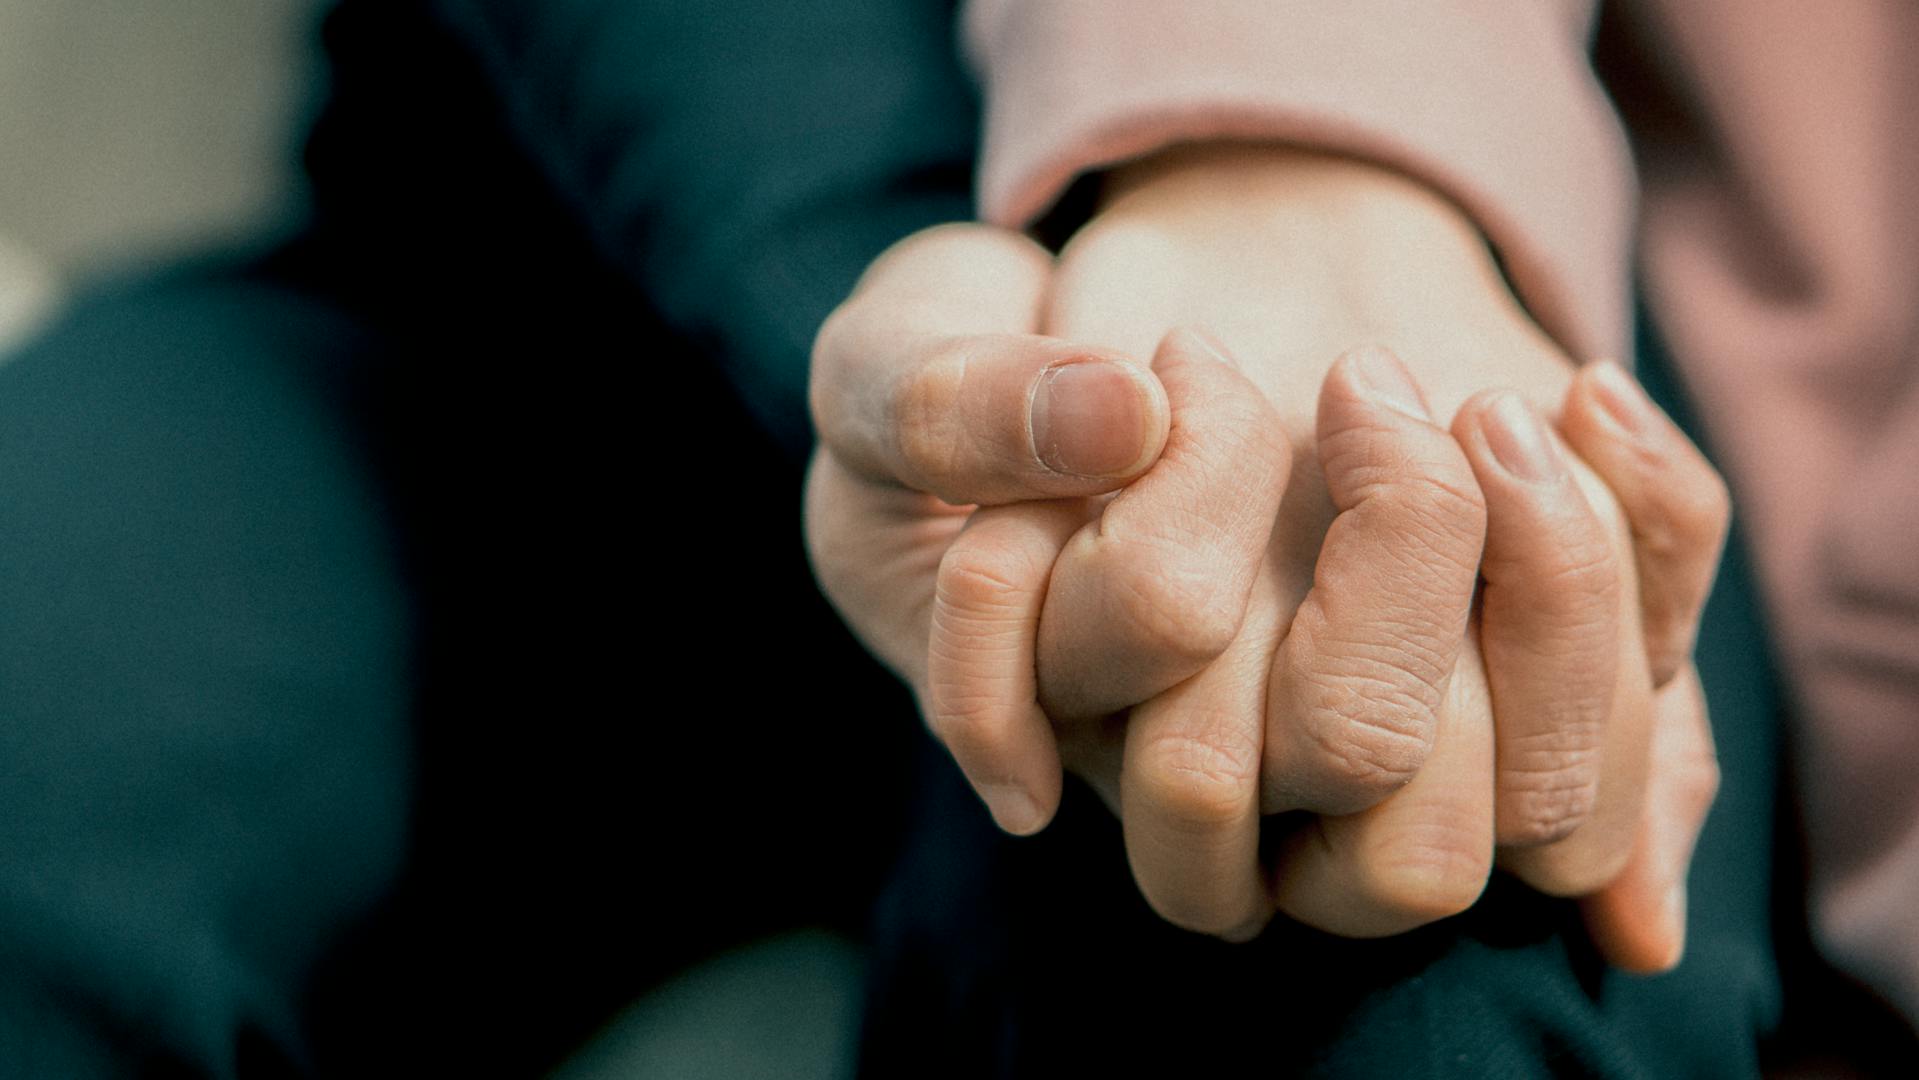 A couple holding hands. For illustration purposes only  | Source: Pexels